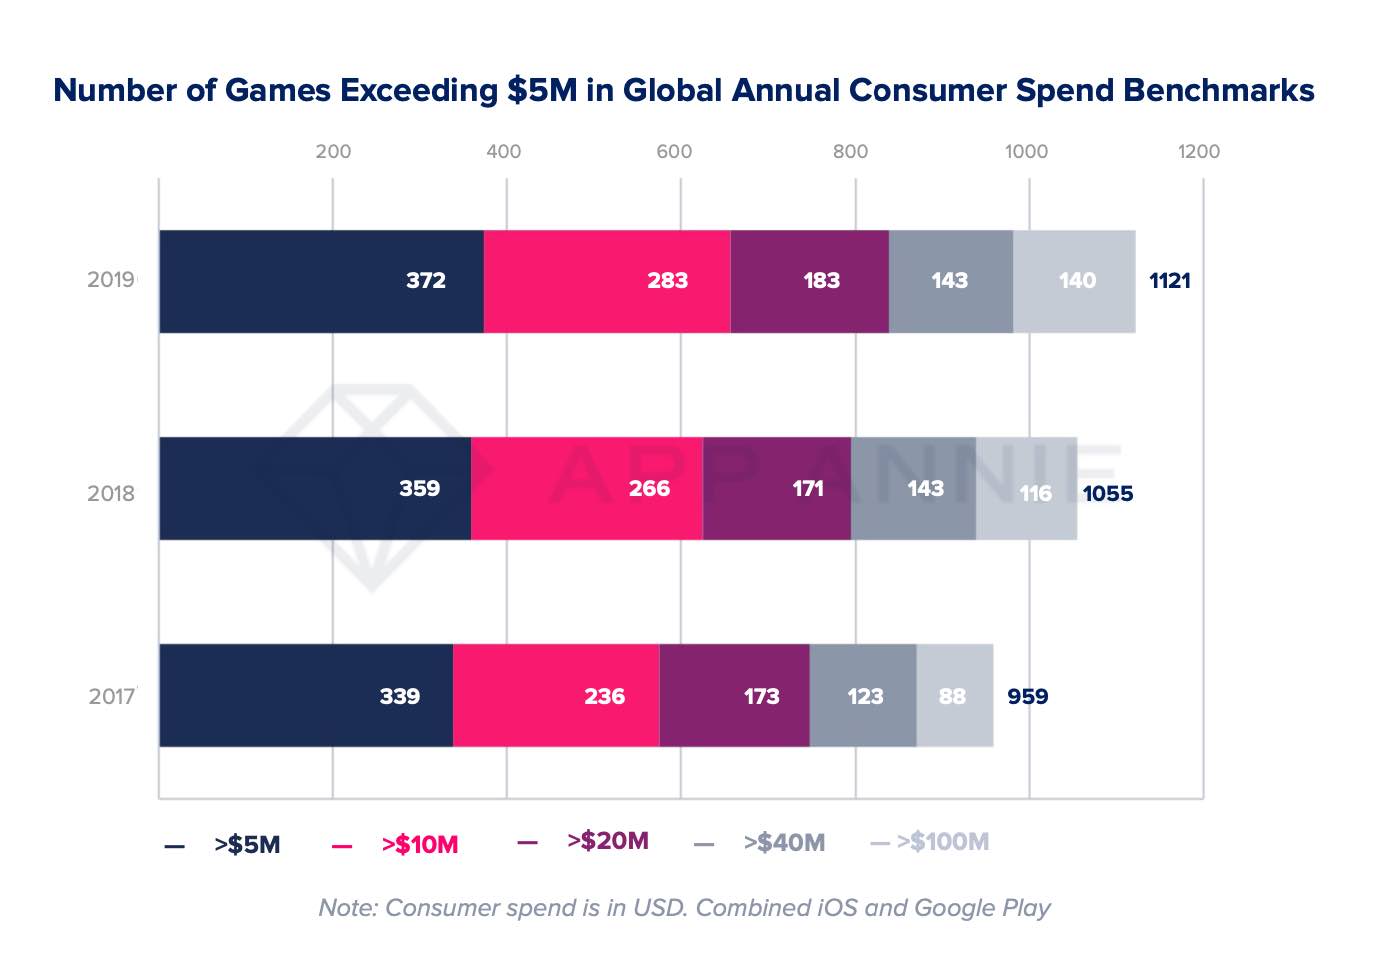 Number of games with more than $5M in Annual Consumer Spend